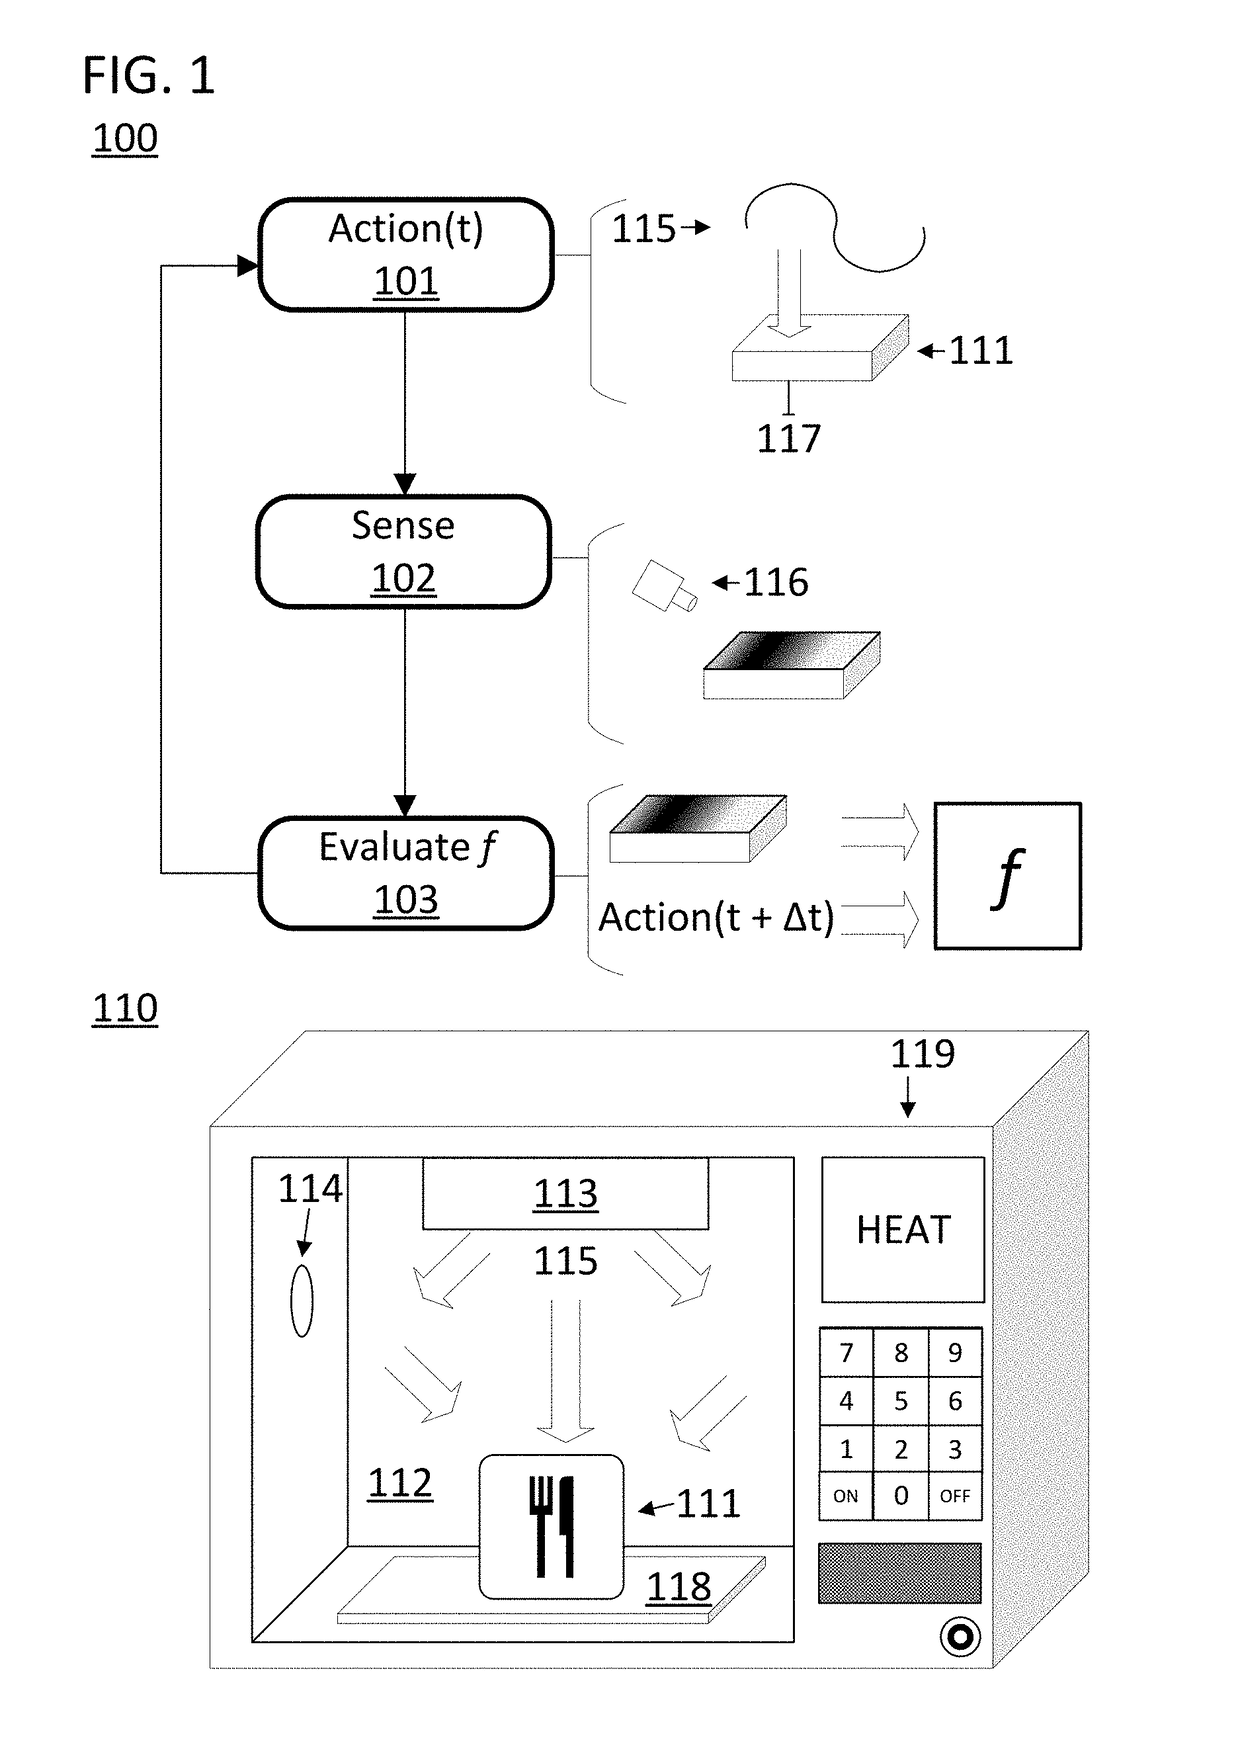 Electronic oven with infrared evaluative control